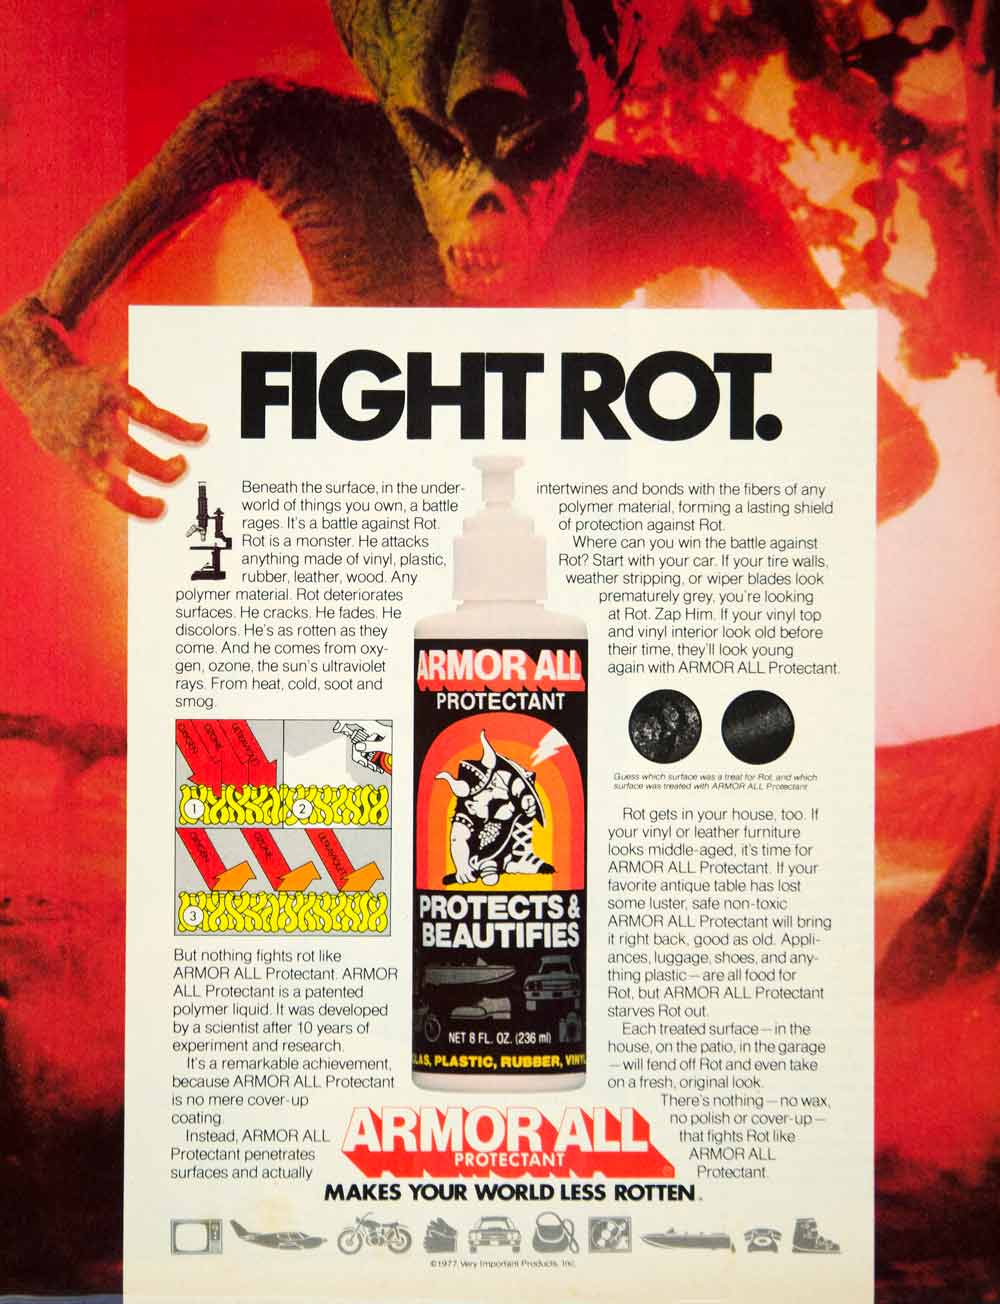 1977 Ad Armor All Fight Rot Alien Protectant Automotive Care Product YCD9